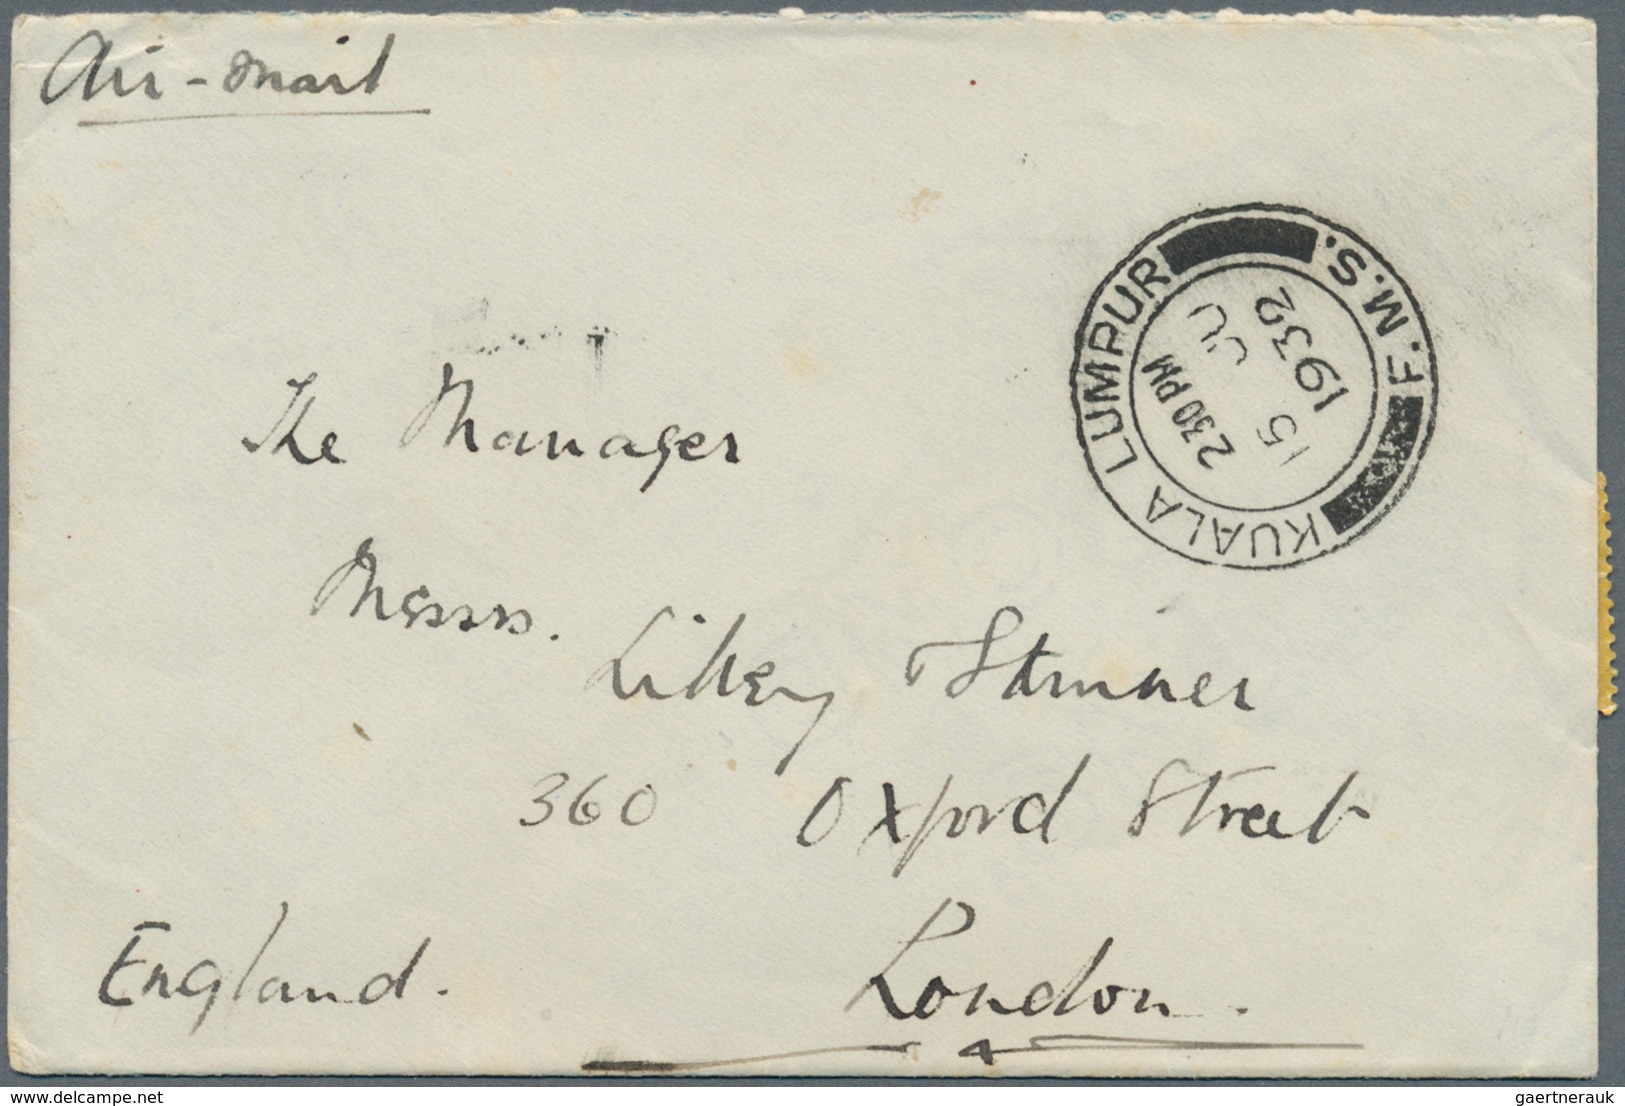 Malaiische Staaten - Selangor: 1932/1941, small lot of two airmails with 50c mosque, one to Bangkok,